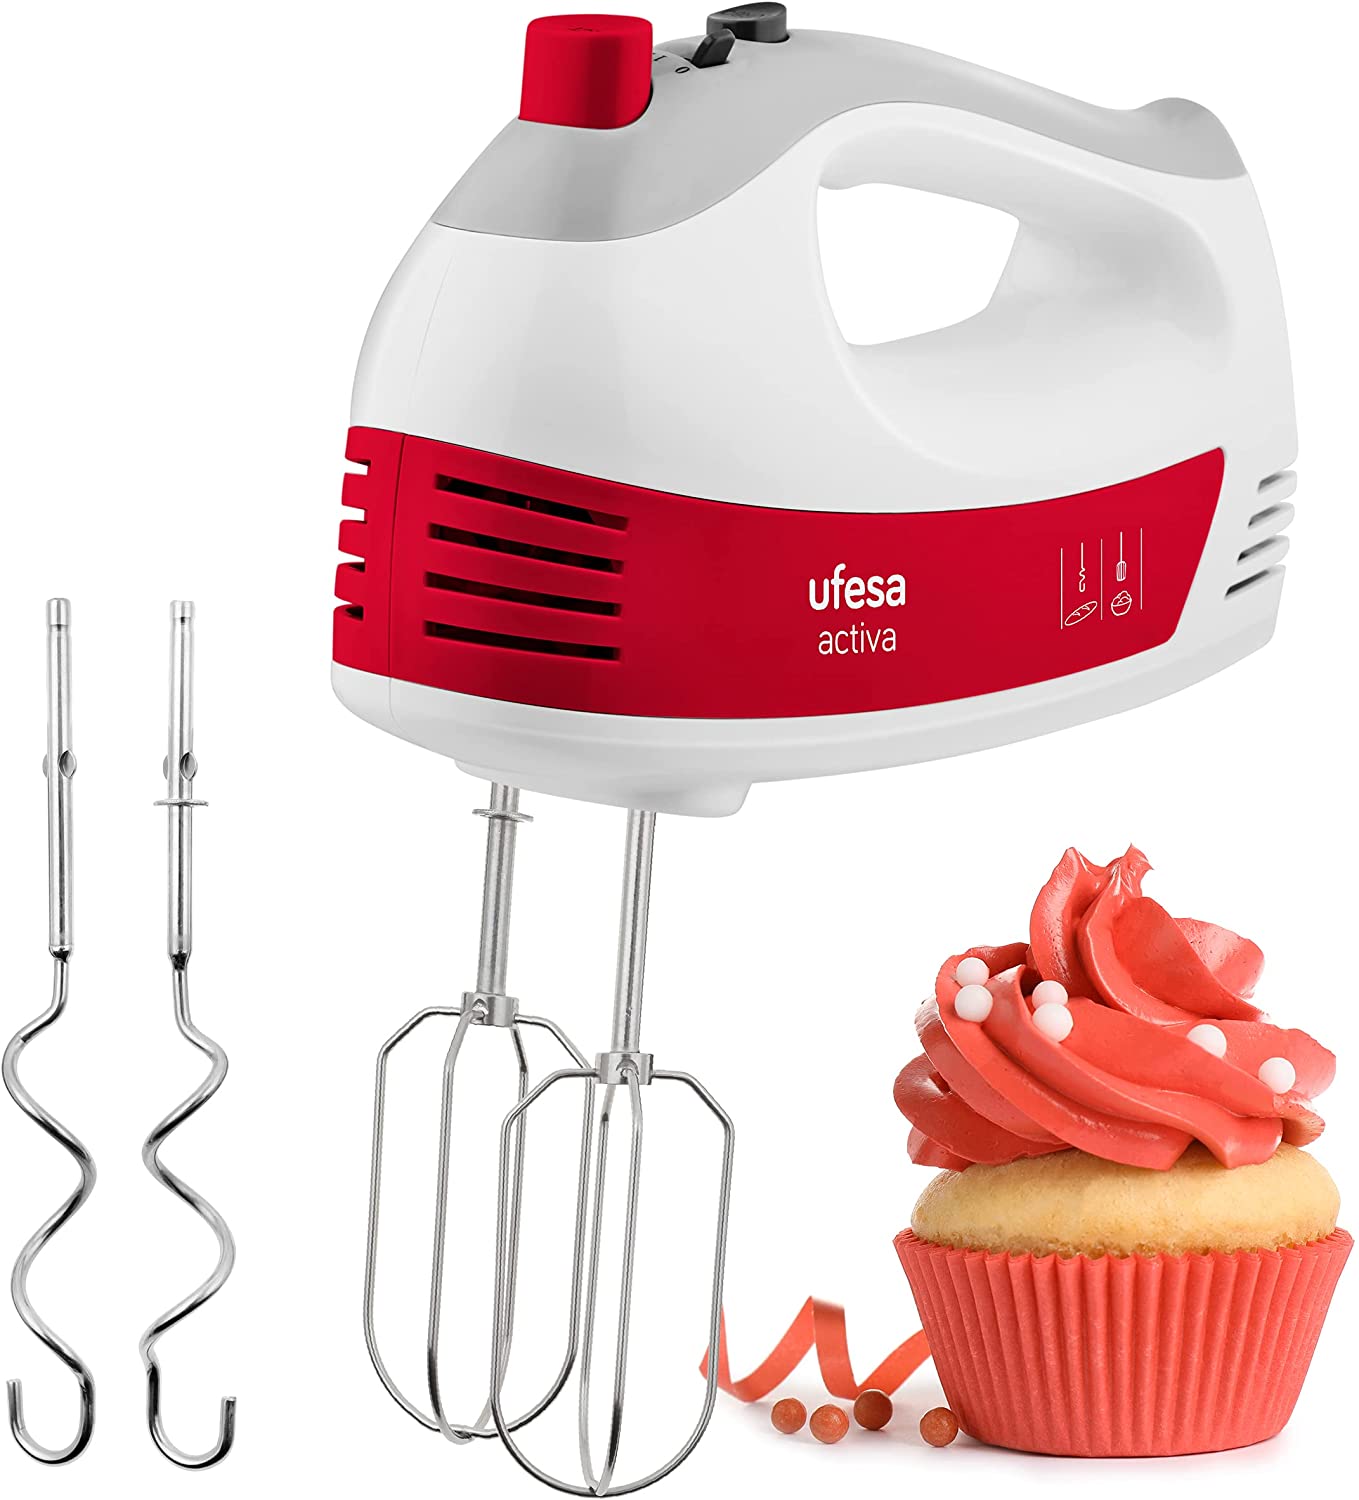 Ufesa BV4650 Hand Mixer, Hand Mixer, 400 W, 5 Speed Settings + Turbo, 2 Dough Hooks, 2 Whisks, Ergonomic Design with Soft Touch Handle